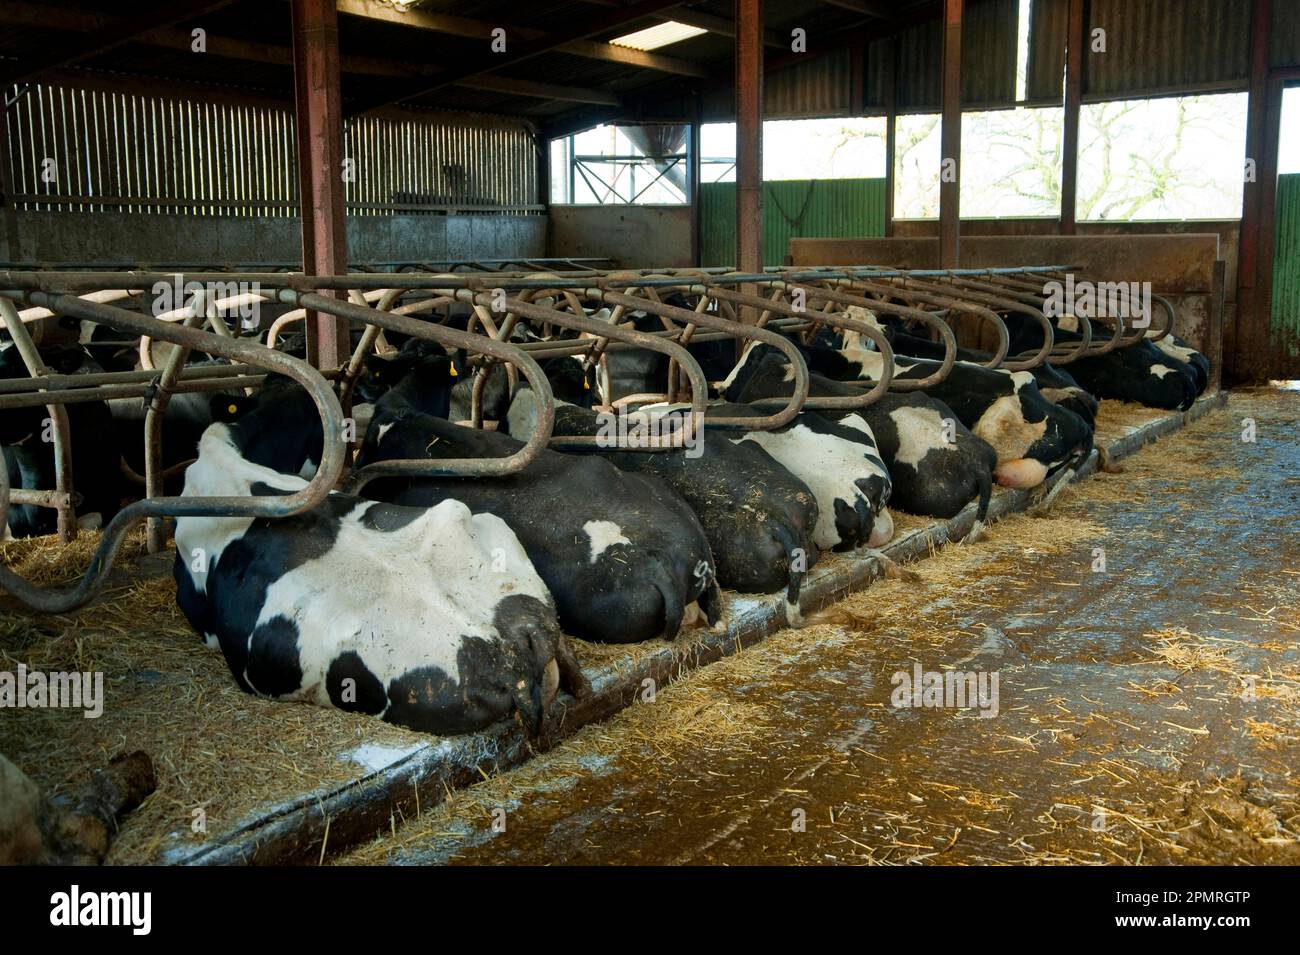 Domestic cattle, Holstein cows, herd in cubicles with mattresses and straw bedding, Stoke-on-Trent, Staffordshire, England, winter Stock Photo